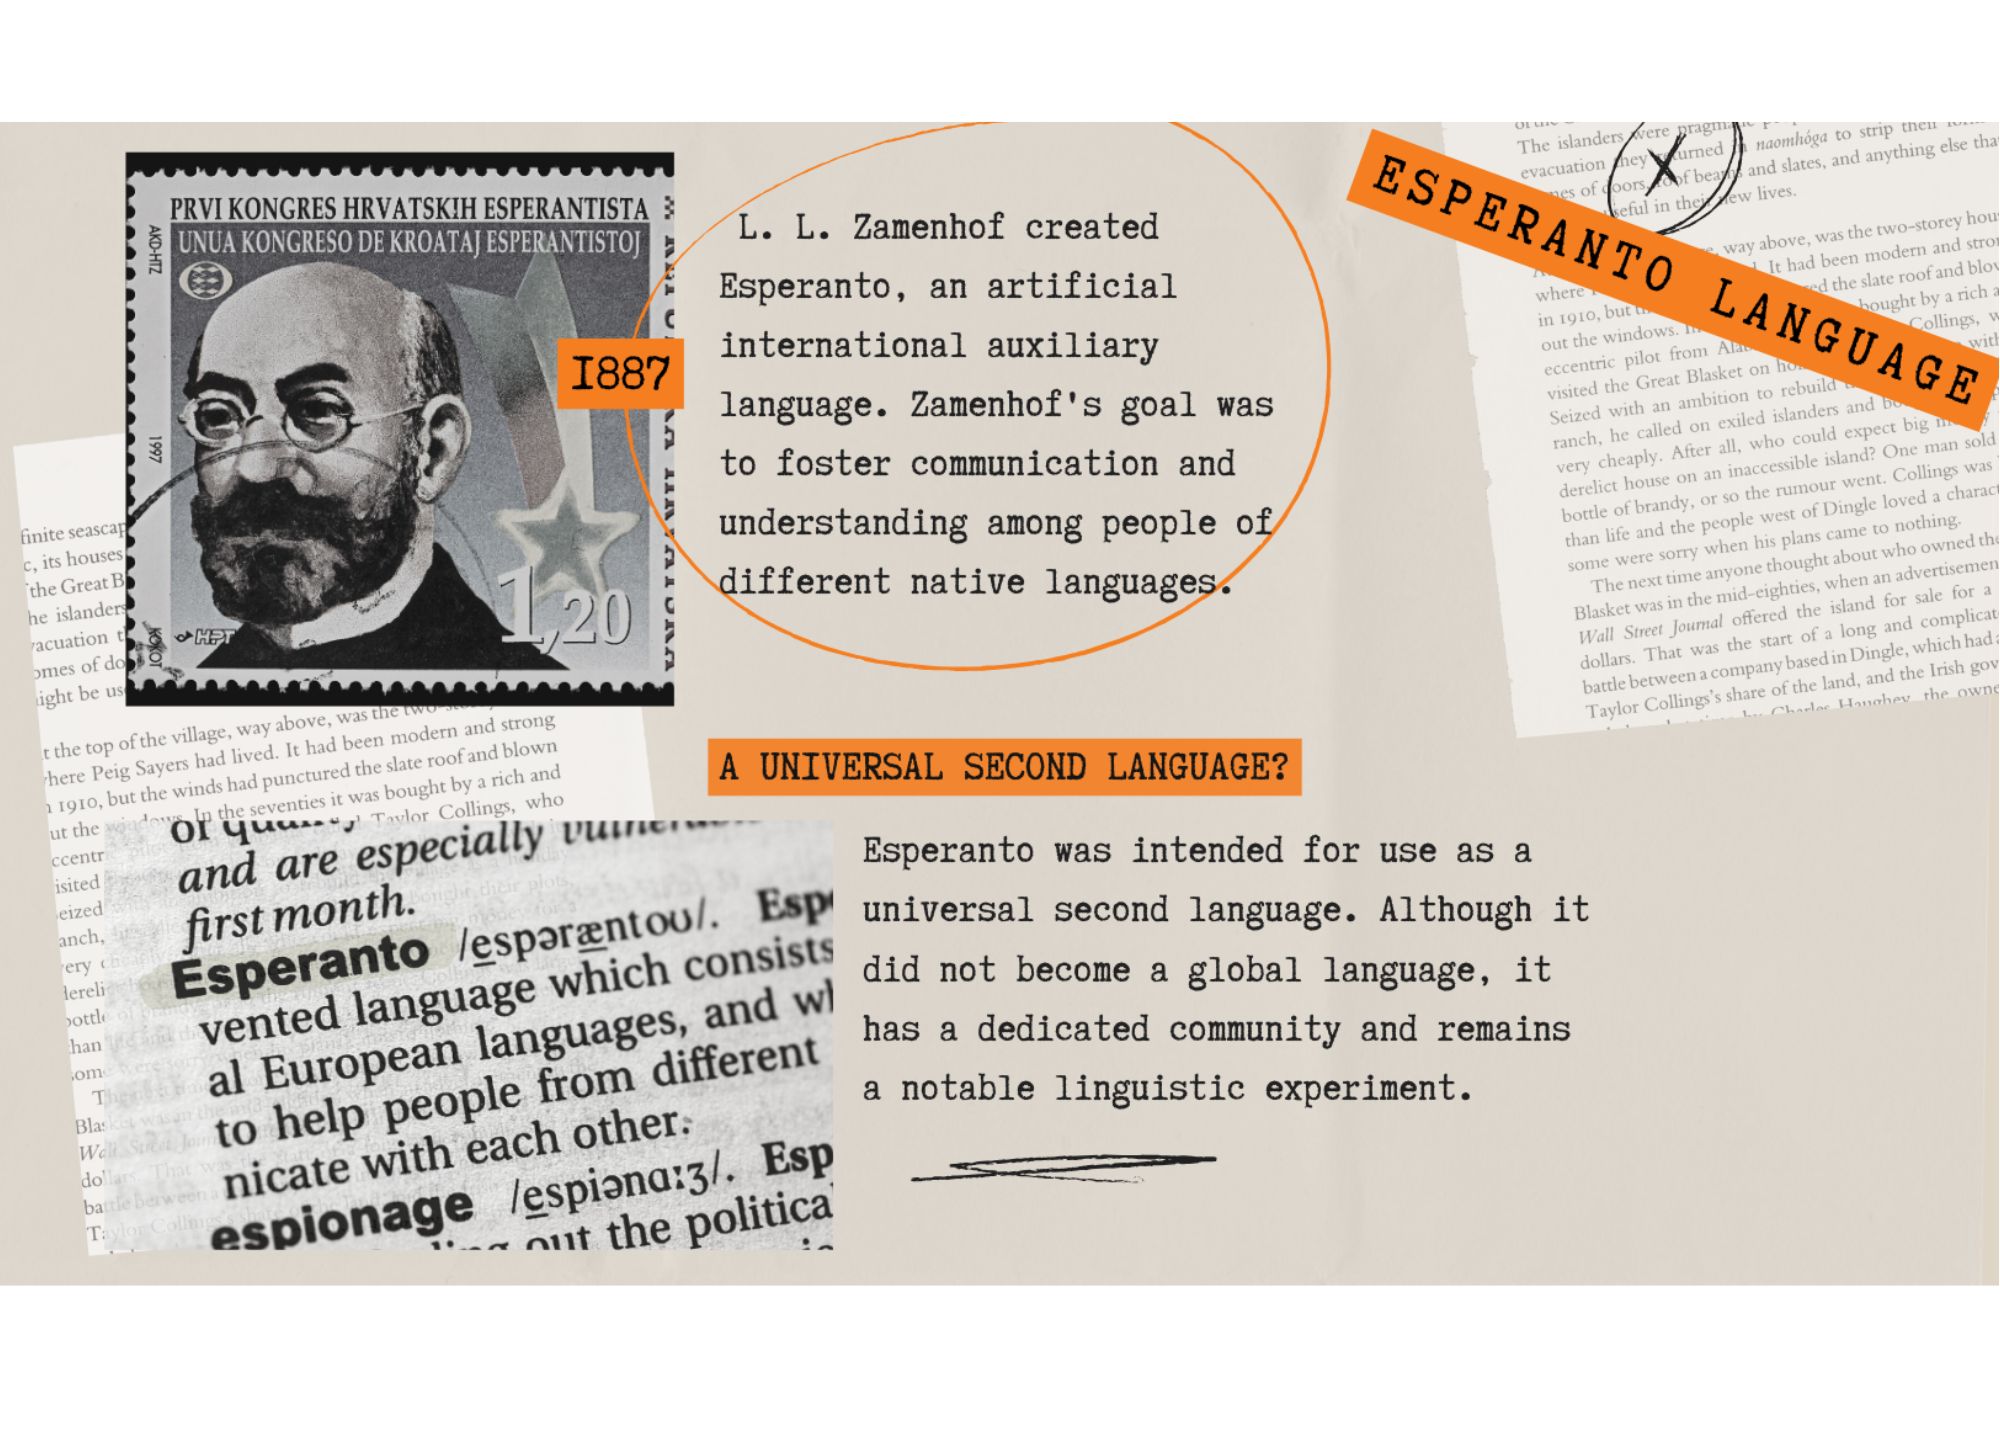 Information about the invented language, Esperanto, which was developed by LL Zamenhof in 1887.